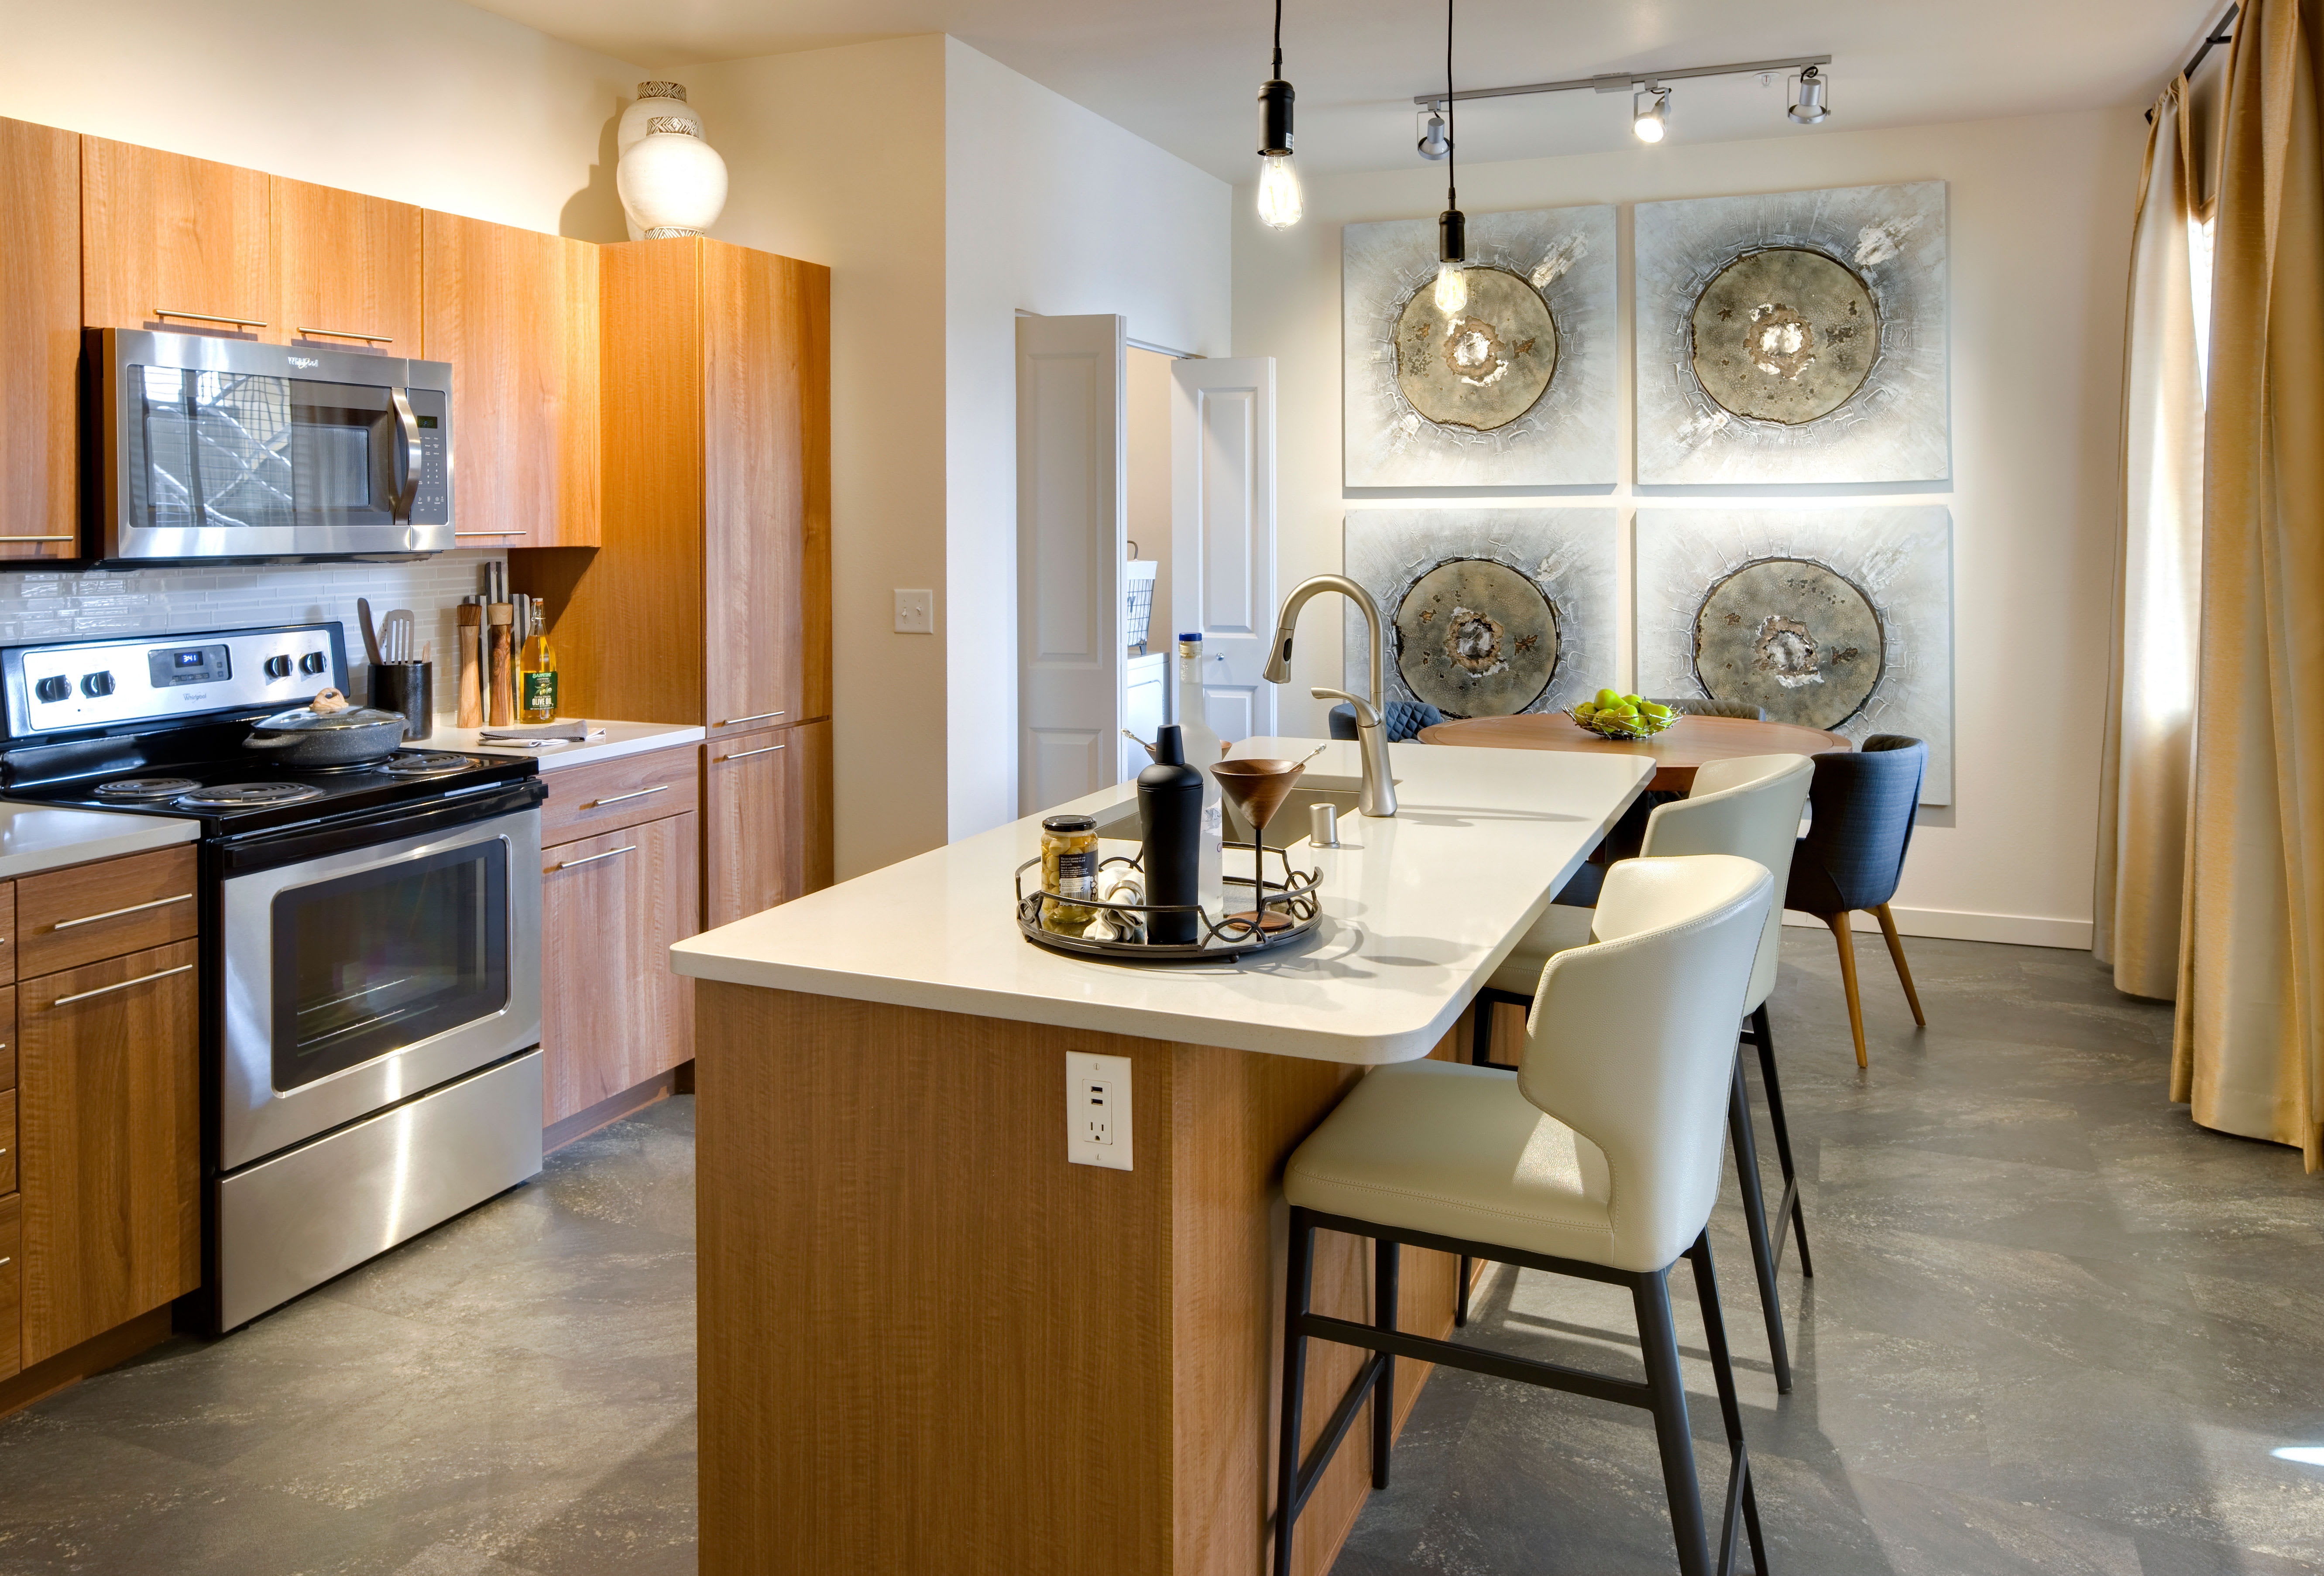 Kitchen and living areas of a model home at Olympus Alameda in Albuquerque, New Mexico